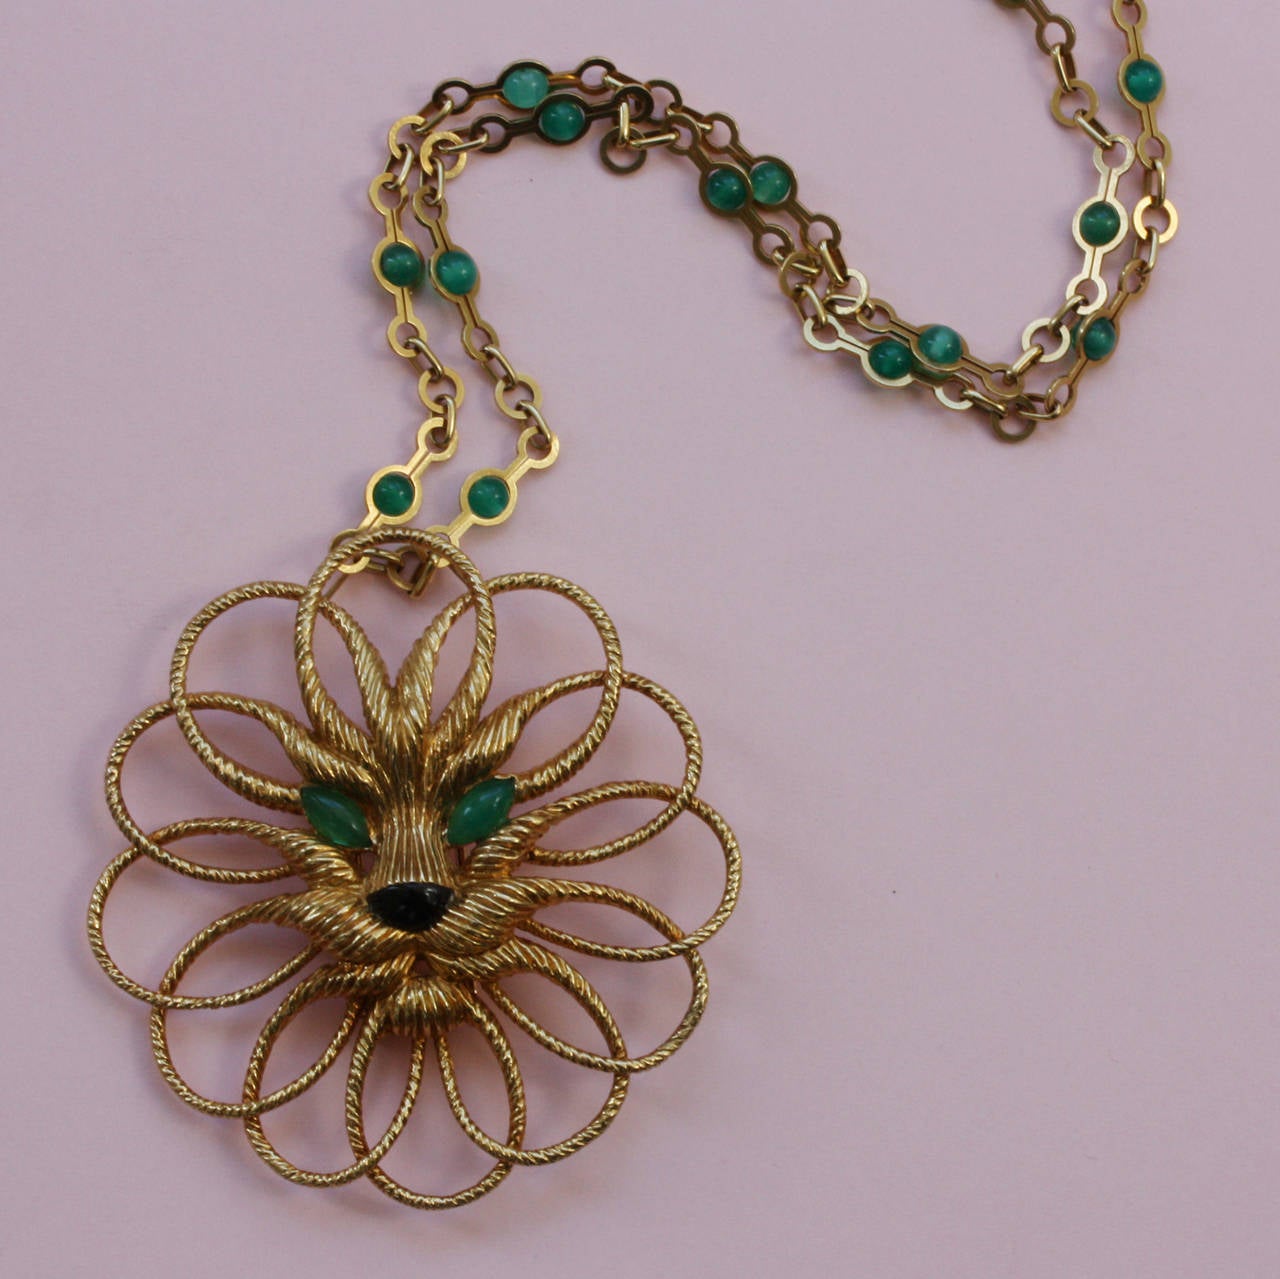 A marvelous 18 carat gold lion pendant (and brooch). Its whiskers and manes are designed in circles of textured gold that go around his face, with an onyx nose and chrysoprase eyes, on a 18 carat gold and chrysoprase bead long chain, both signed and